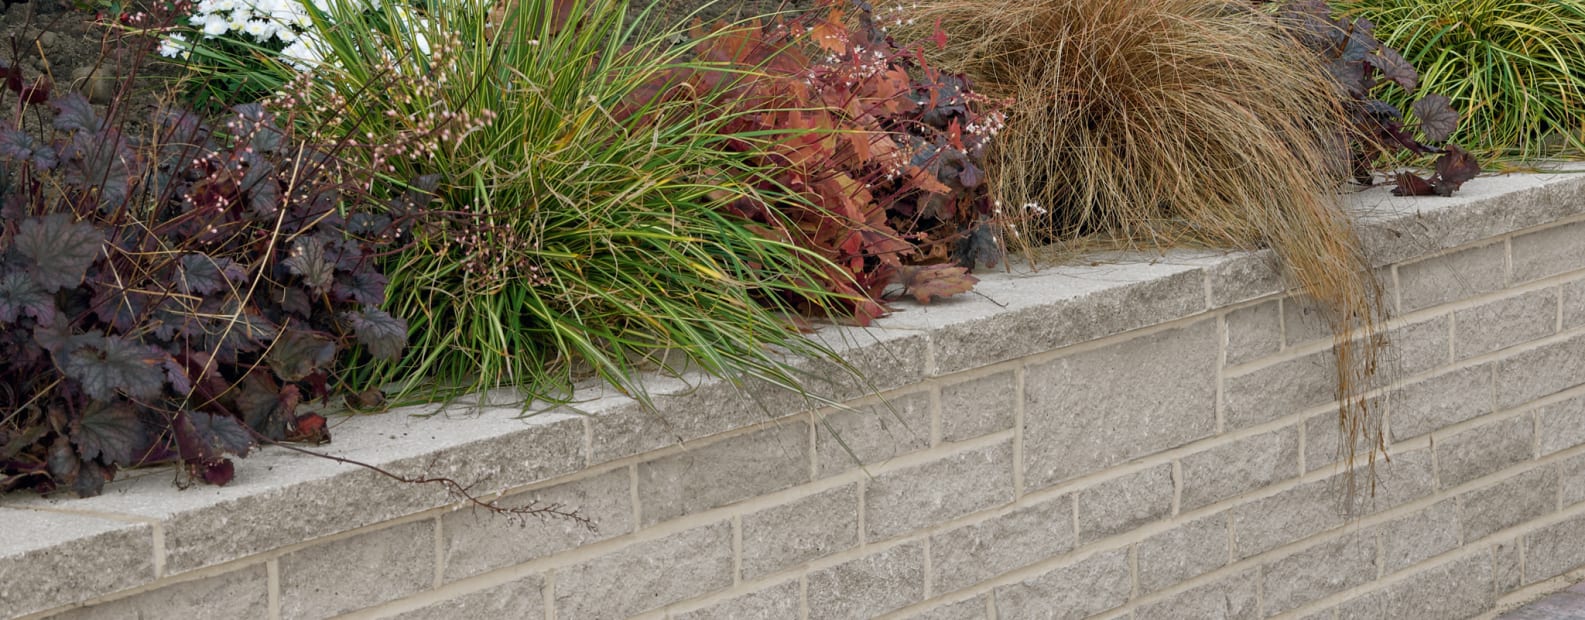 Miniature Cement Bricks And Mortar Allow You To Build Yourself A Mini Wall